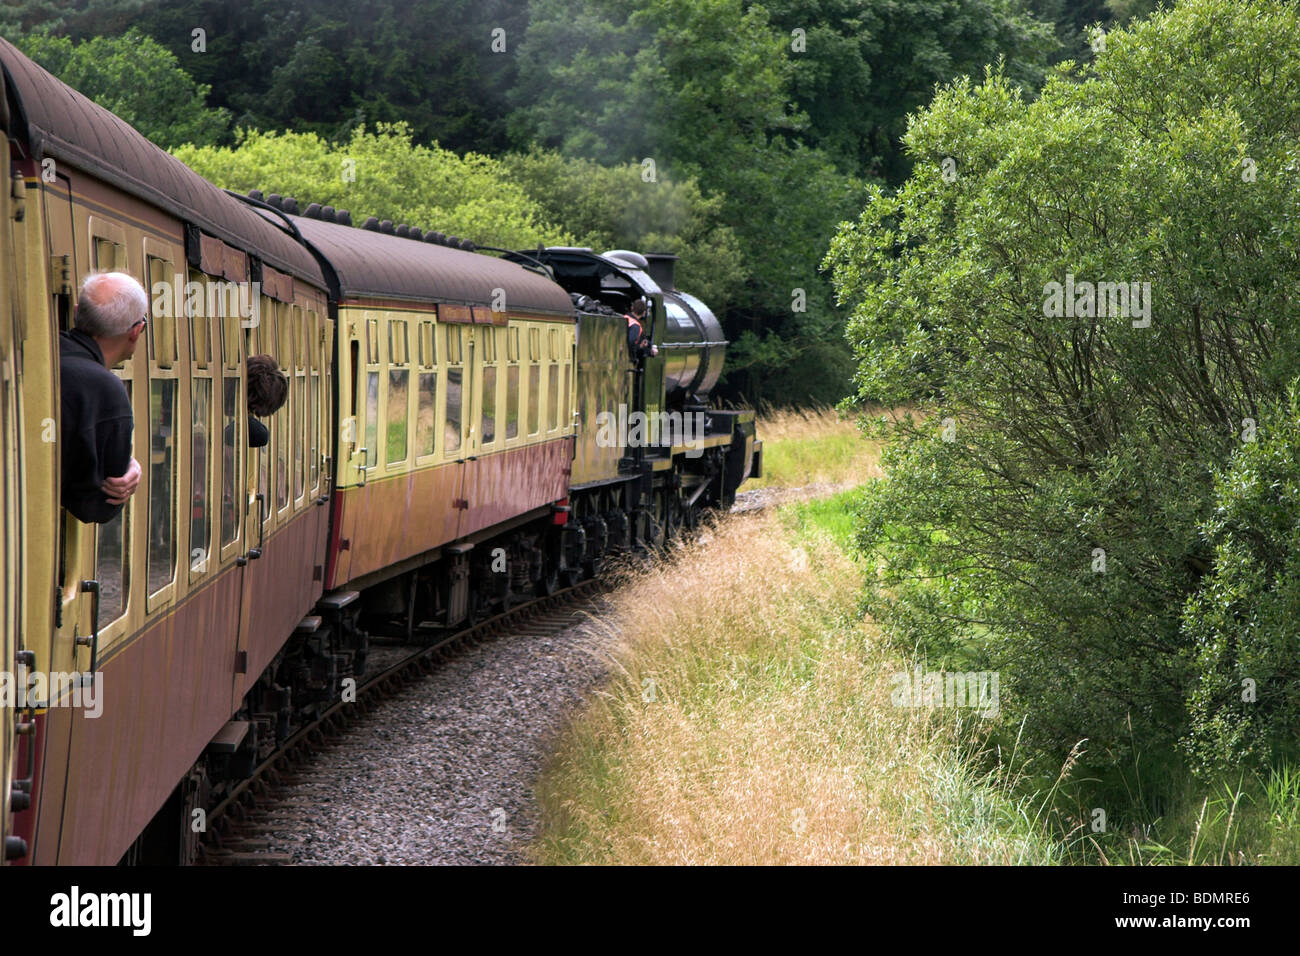 NYMR, Passengers leaning out of the window of a moving steam train, North York Moors Railway, North Yorkshire, England UK Stock Photo